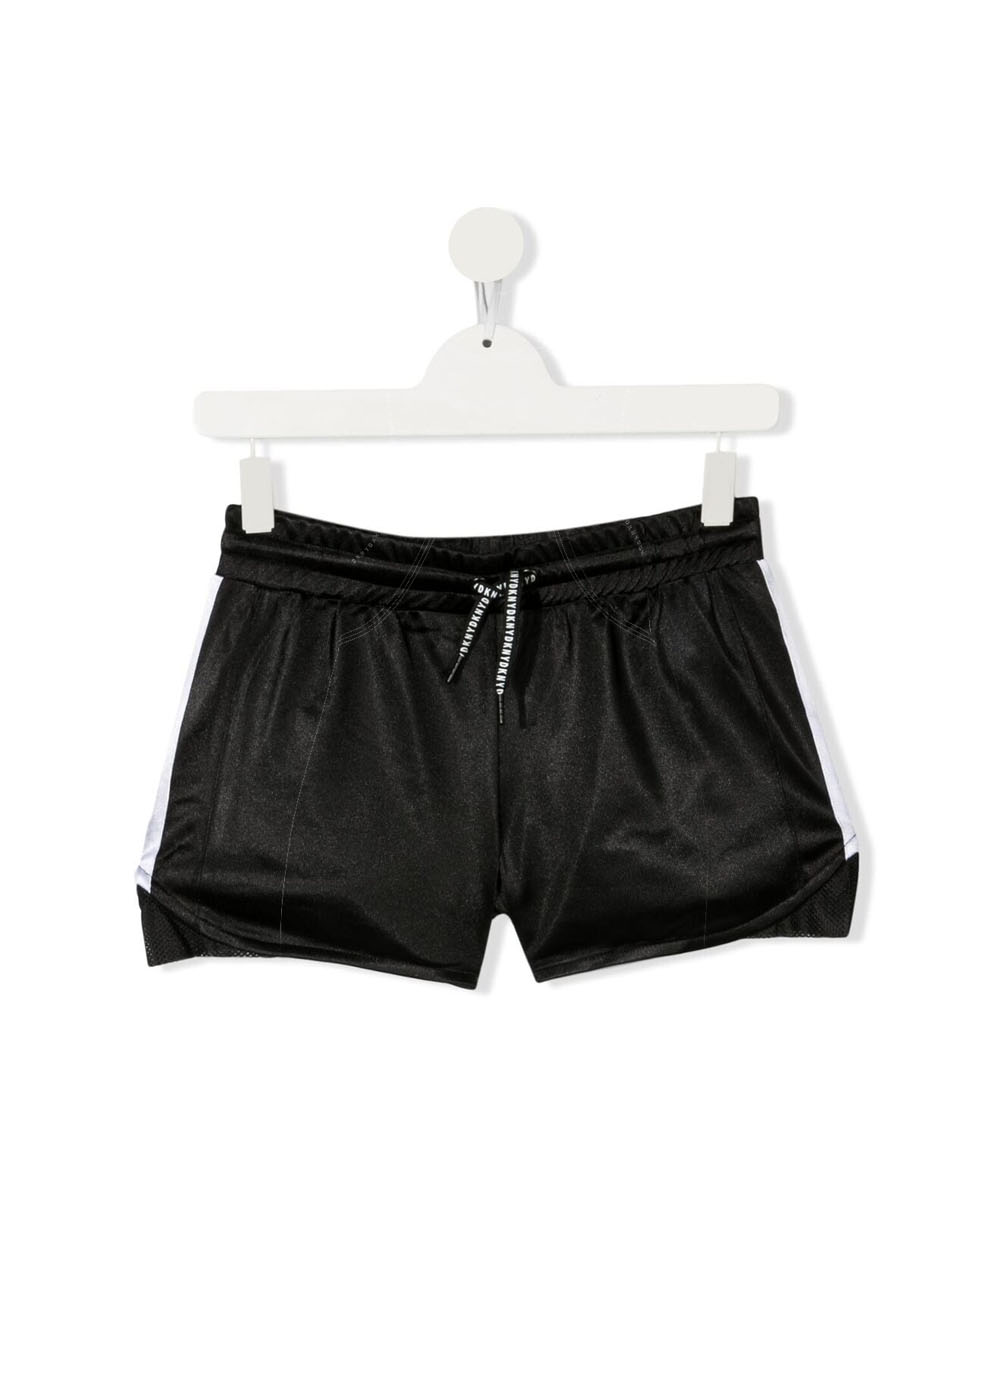 Featured image for “DKNY SHORTS NERO”